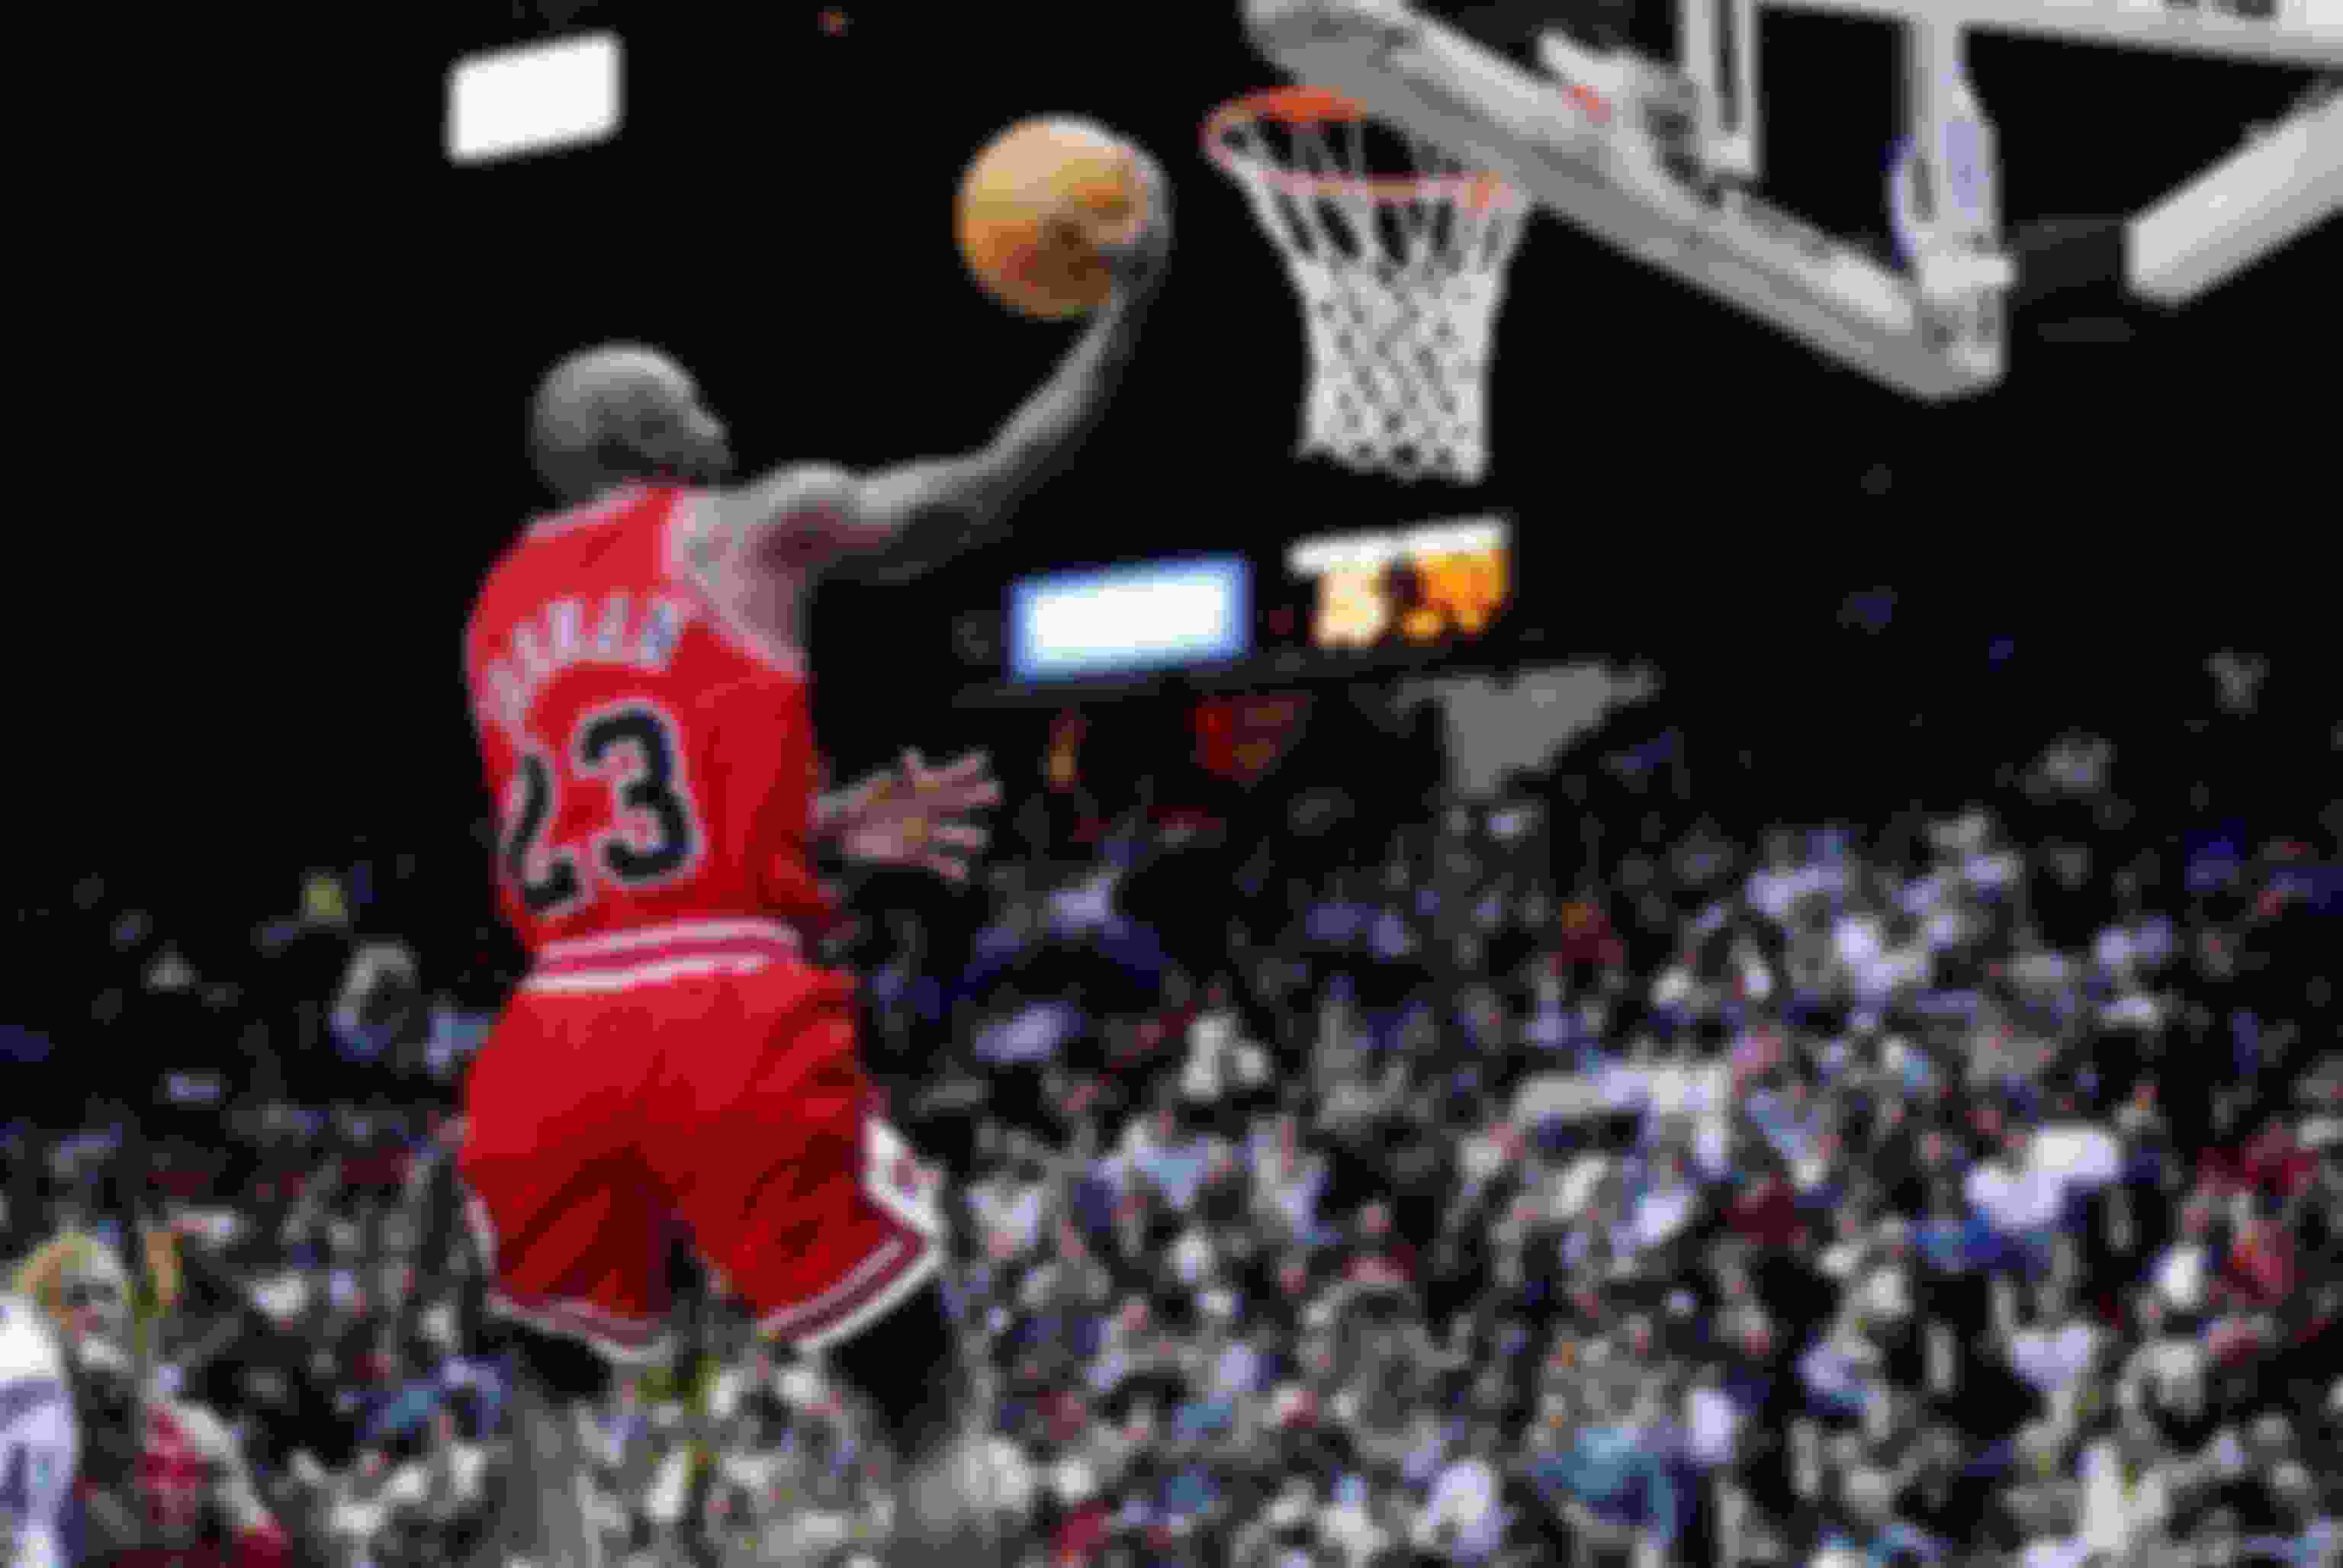 Basketball legend Michael Jordan typically played as a shooting guard